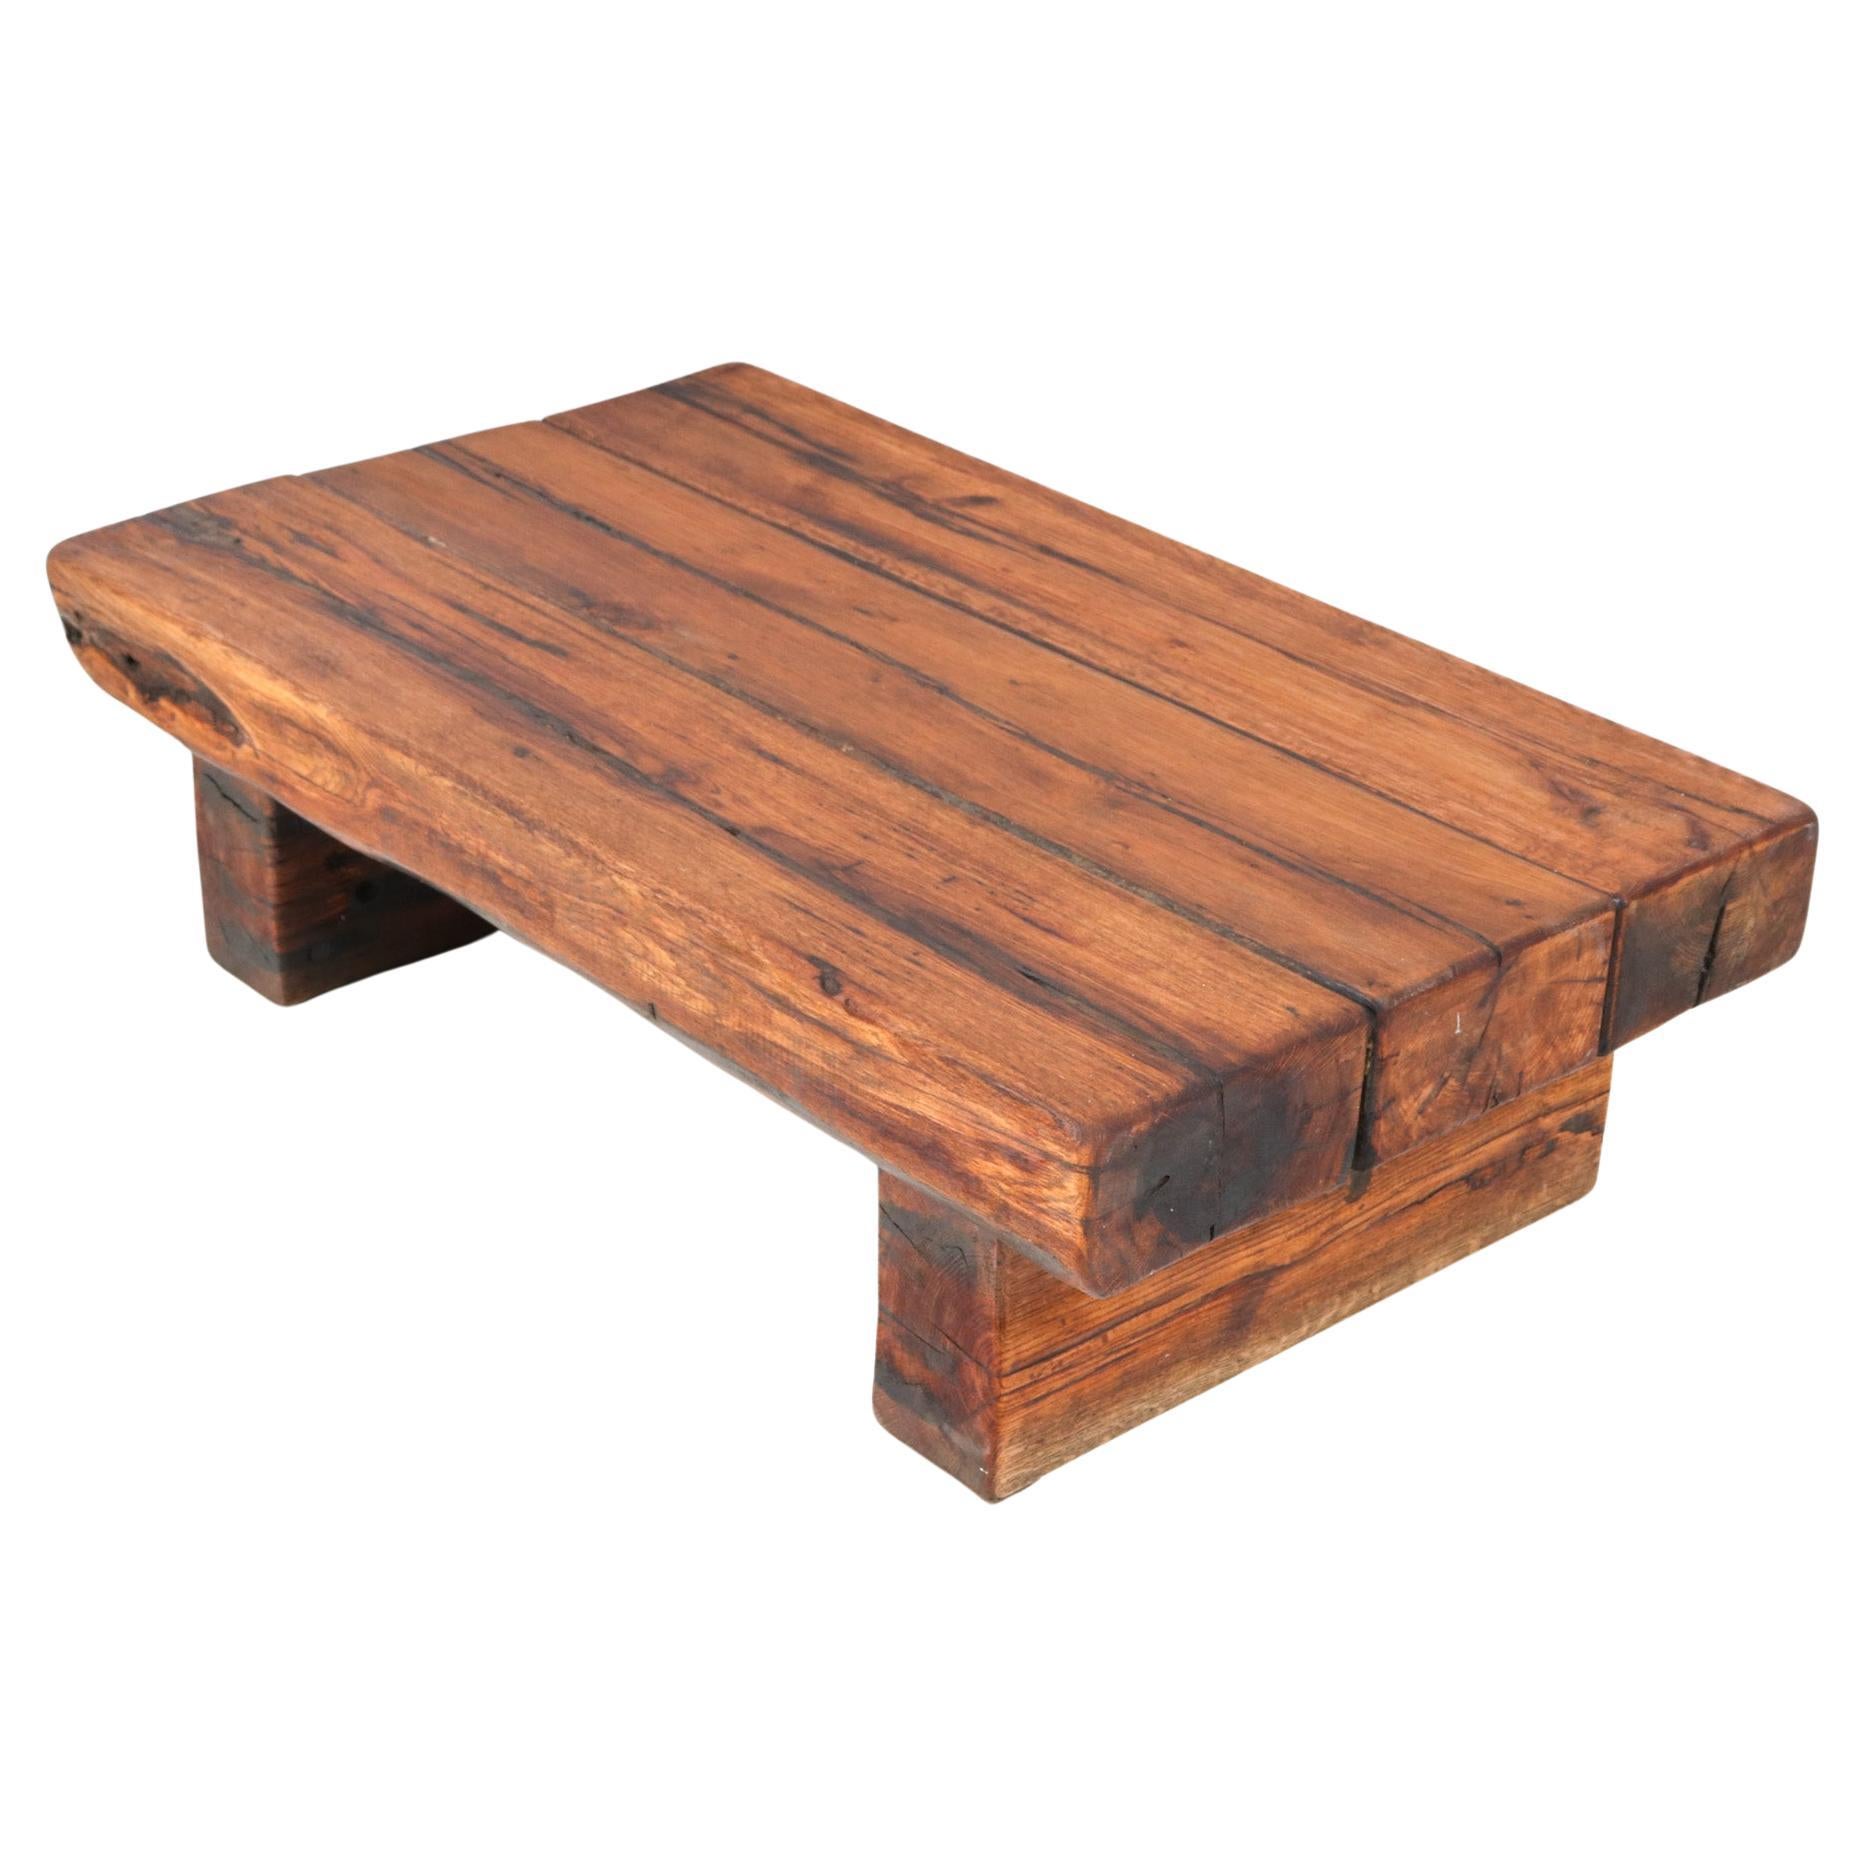 Oak Brutalist Rustic Coffee Table or Cocktail Table, 1960s For Sale